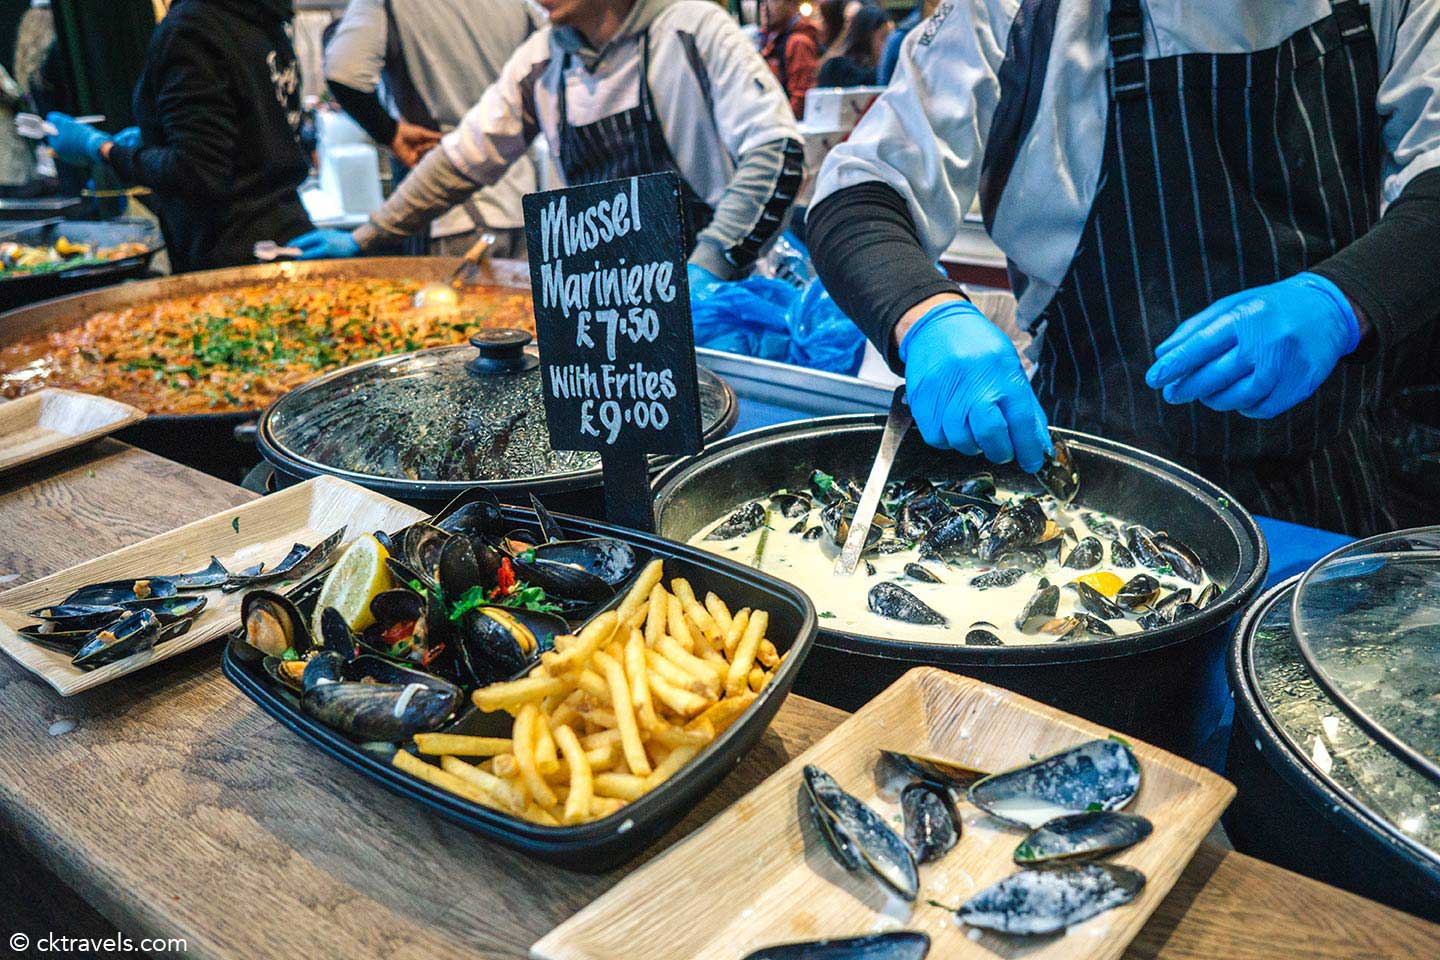 Mussel frites stall at Borough Market guide - London's most famous food market